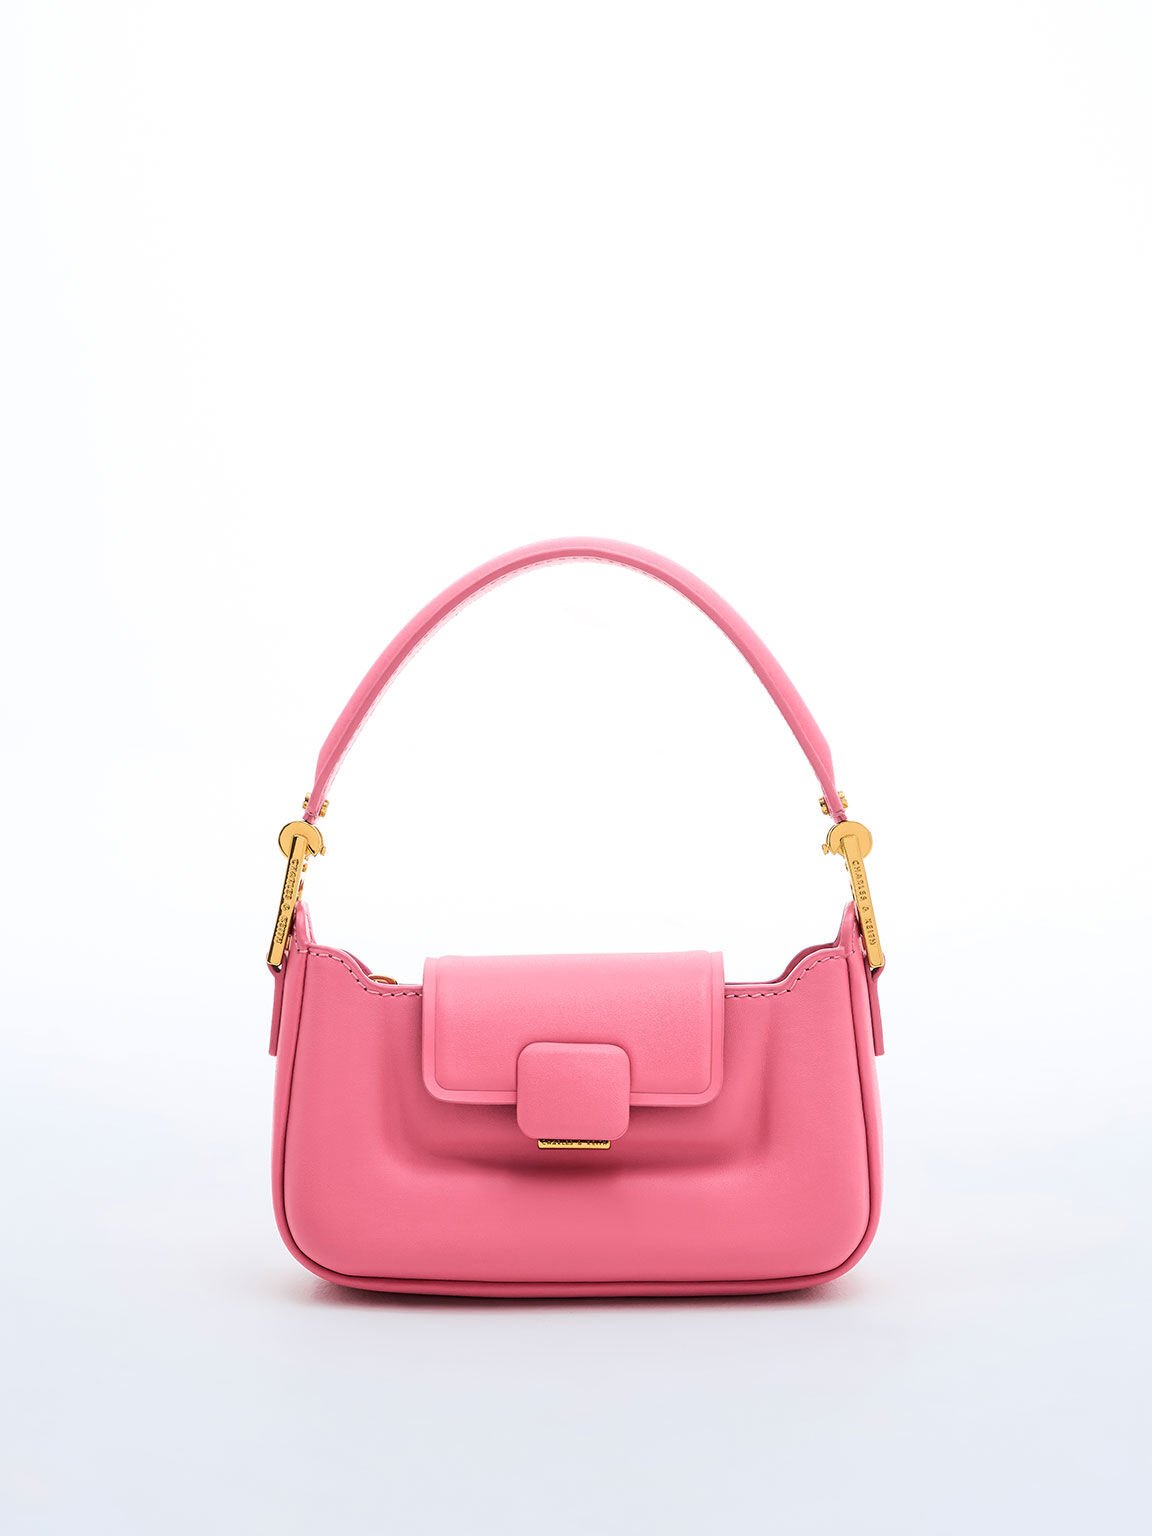 Neon Pink Heart Embossed Flap Square Bag